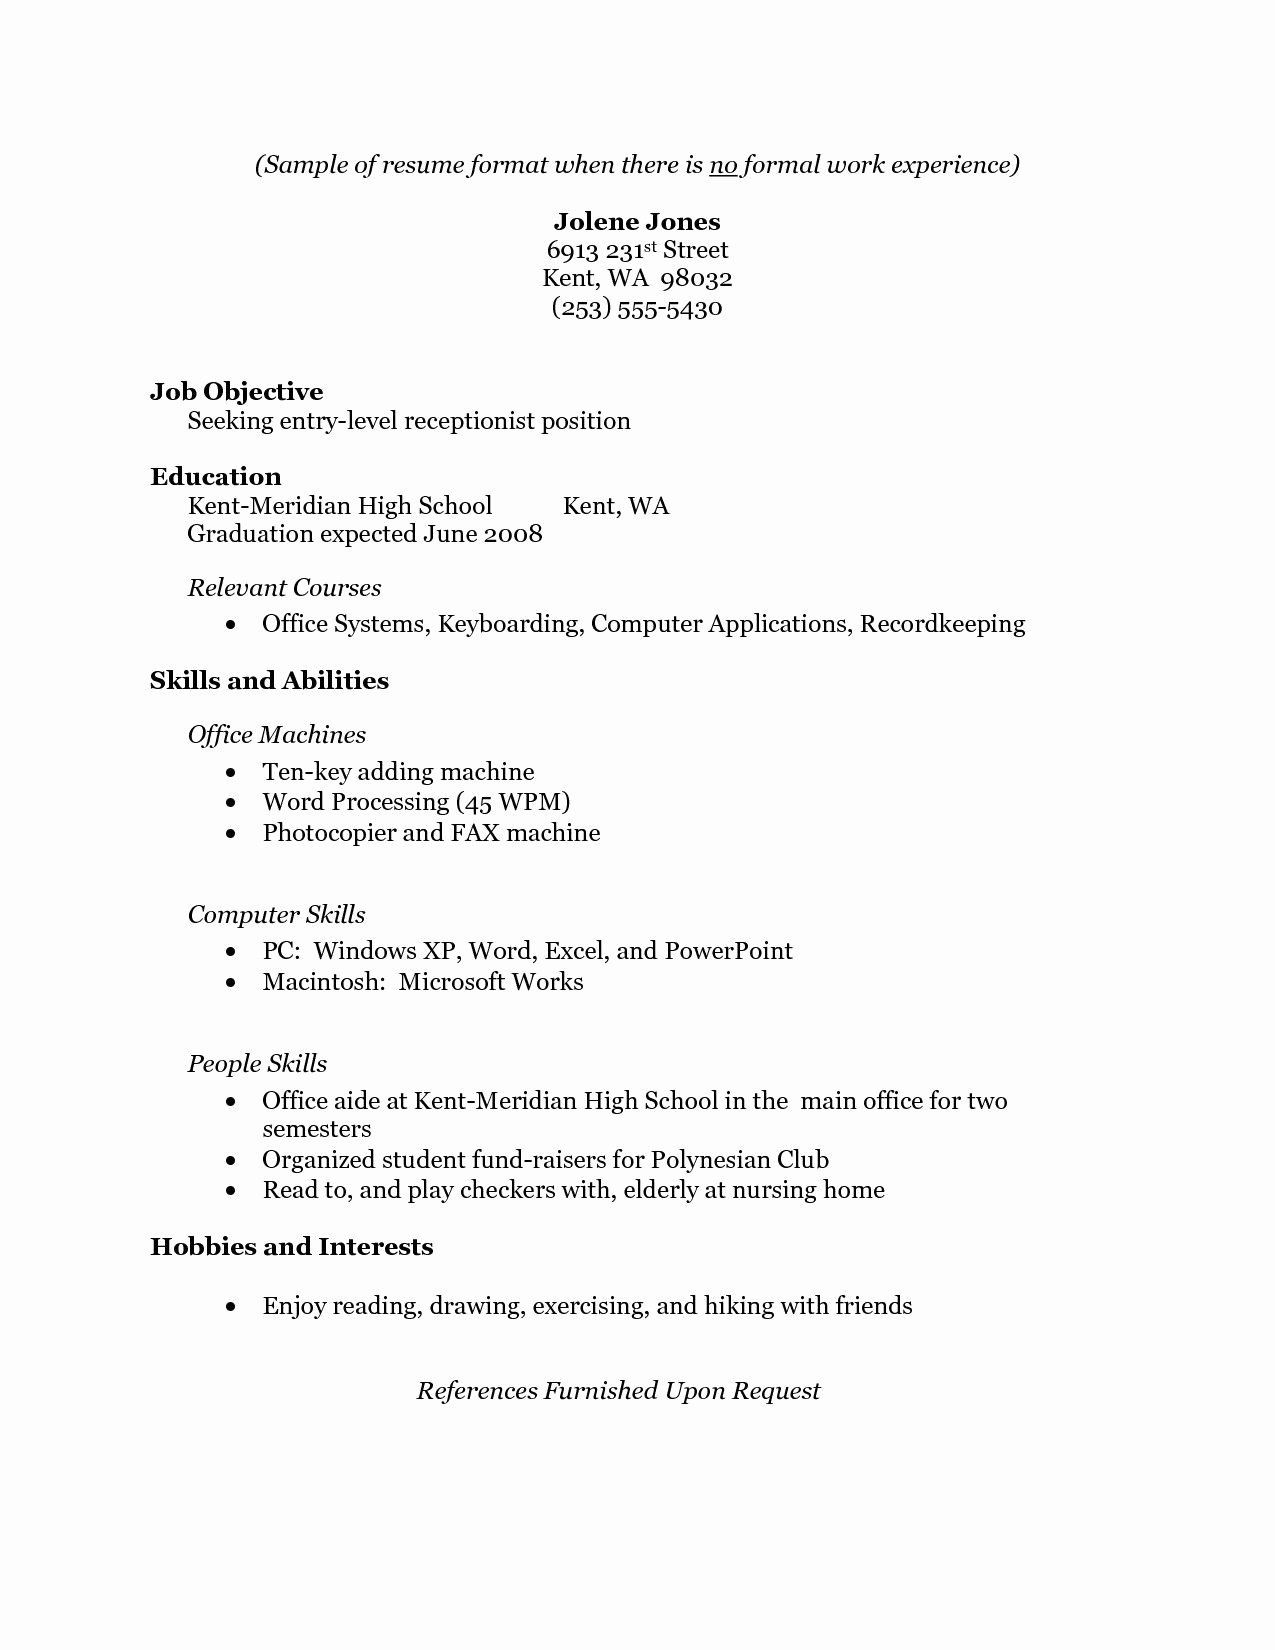 Work Experience On A Resume Sample Resume for Receptionist with No Experienceâ¢ Printable Resume …